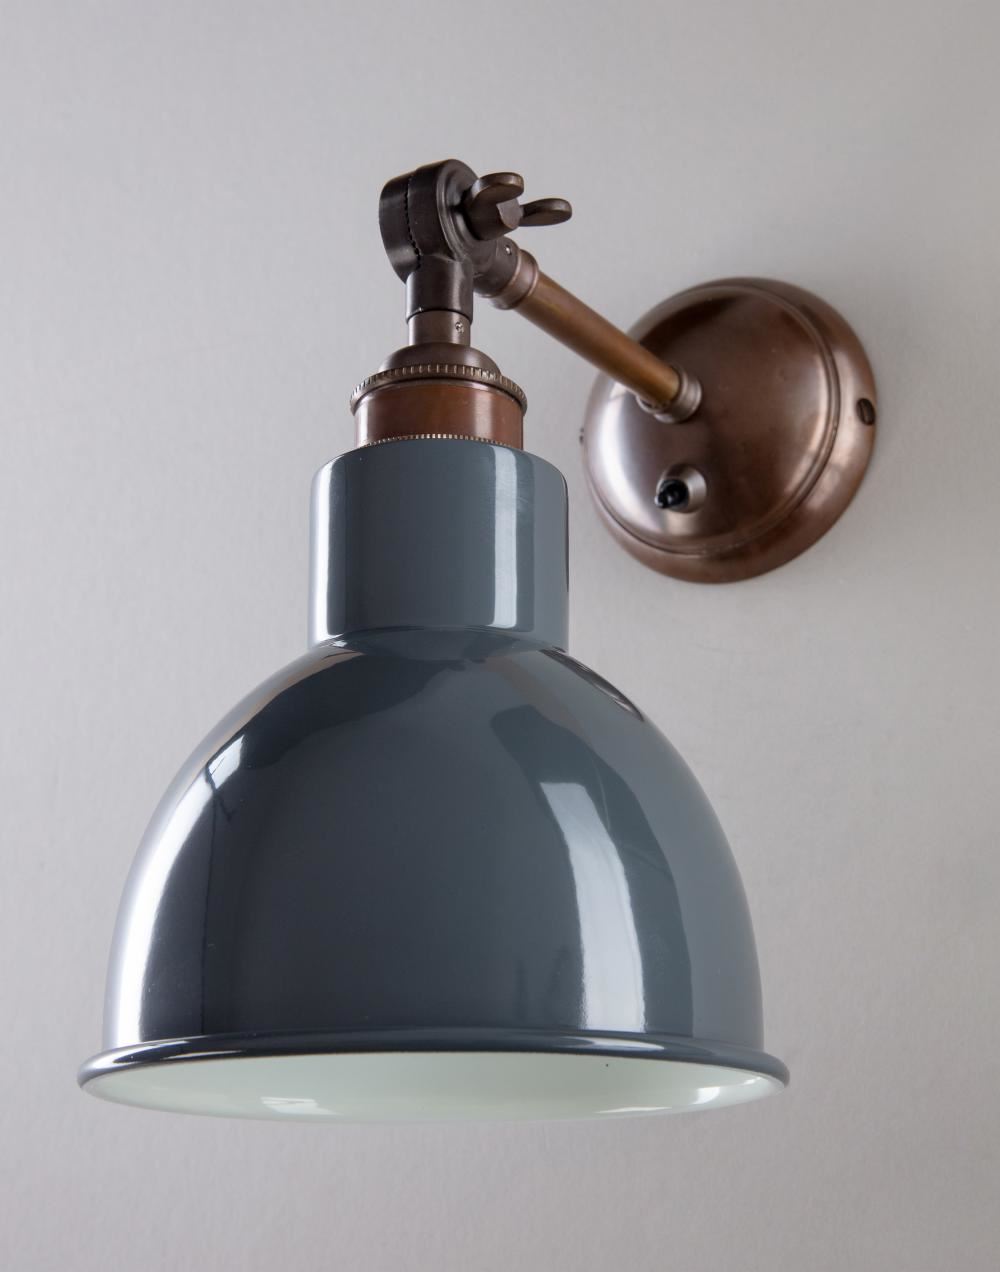 An Churchill Coloured Shades Wall Light from Old School Electric, an industrial style wall light with a blue shade, perfect for lighting fixtures.